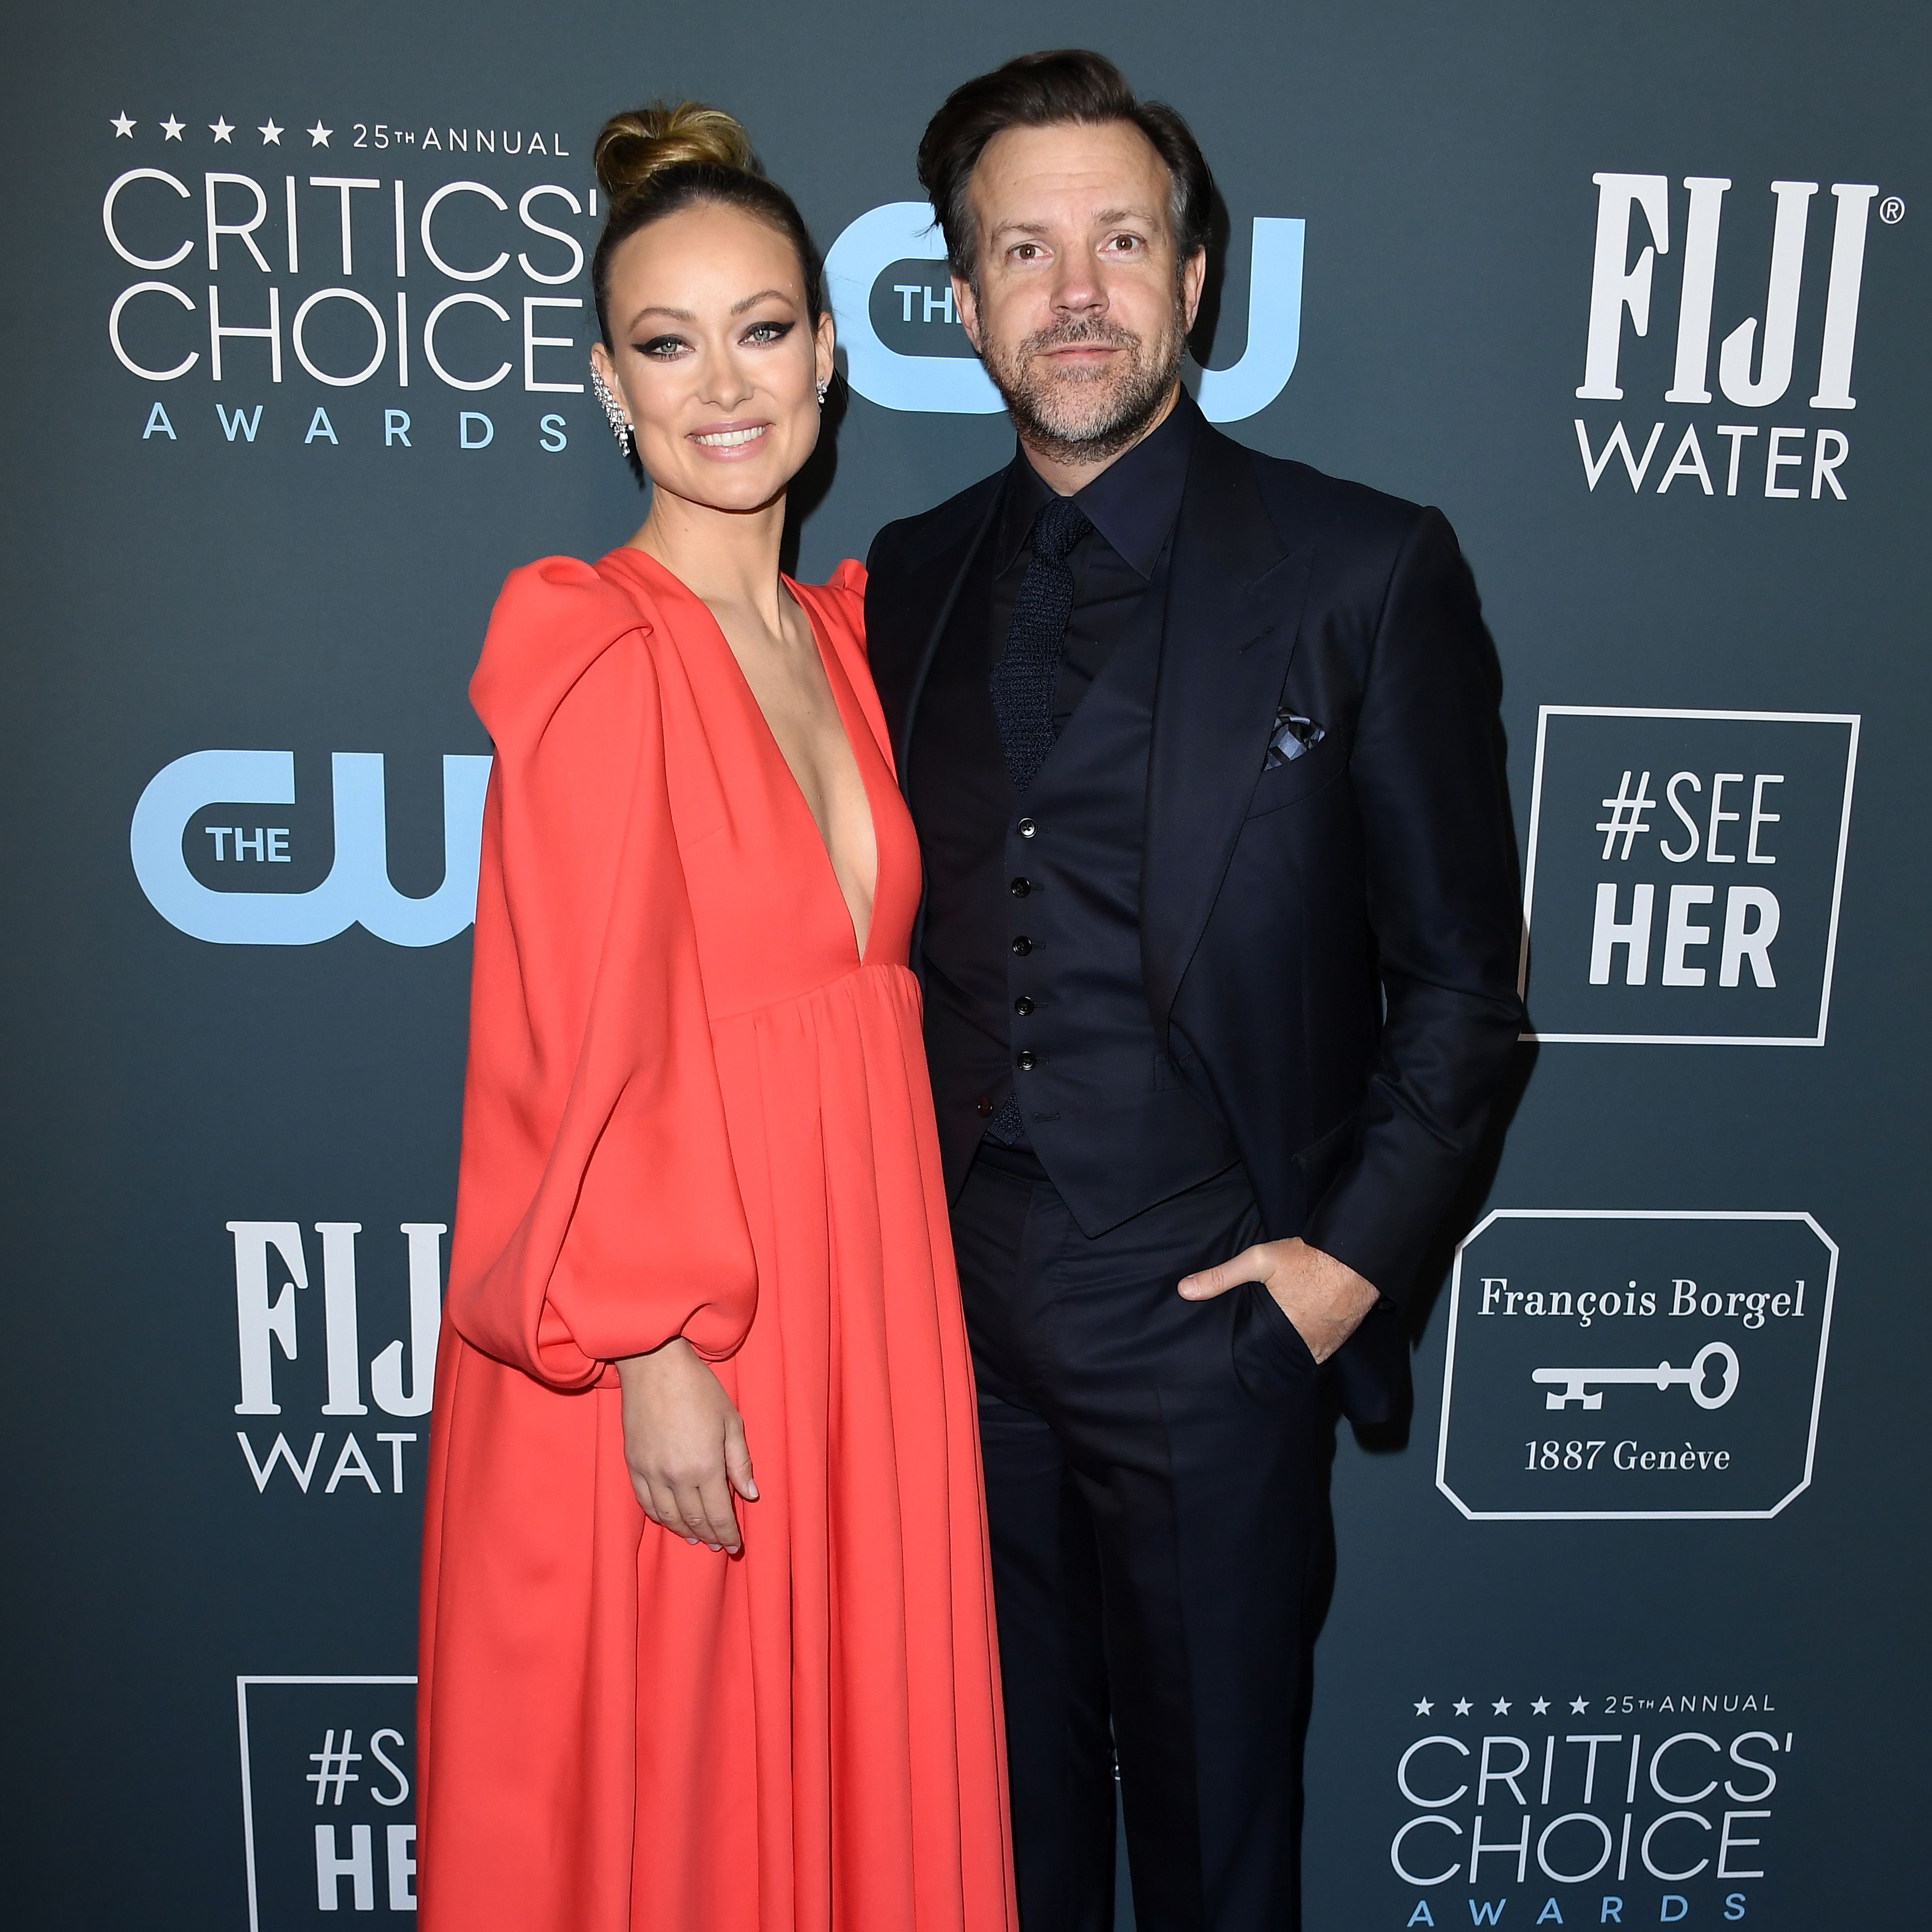 Jason Sudeikis Will Reportedly Pay Olivia Wilde $27K a Month in Child Support